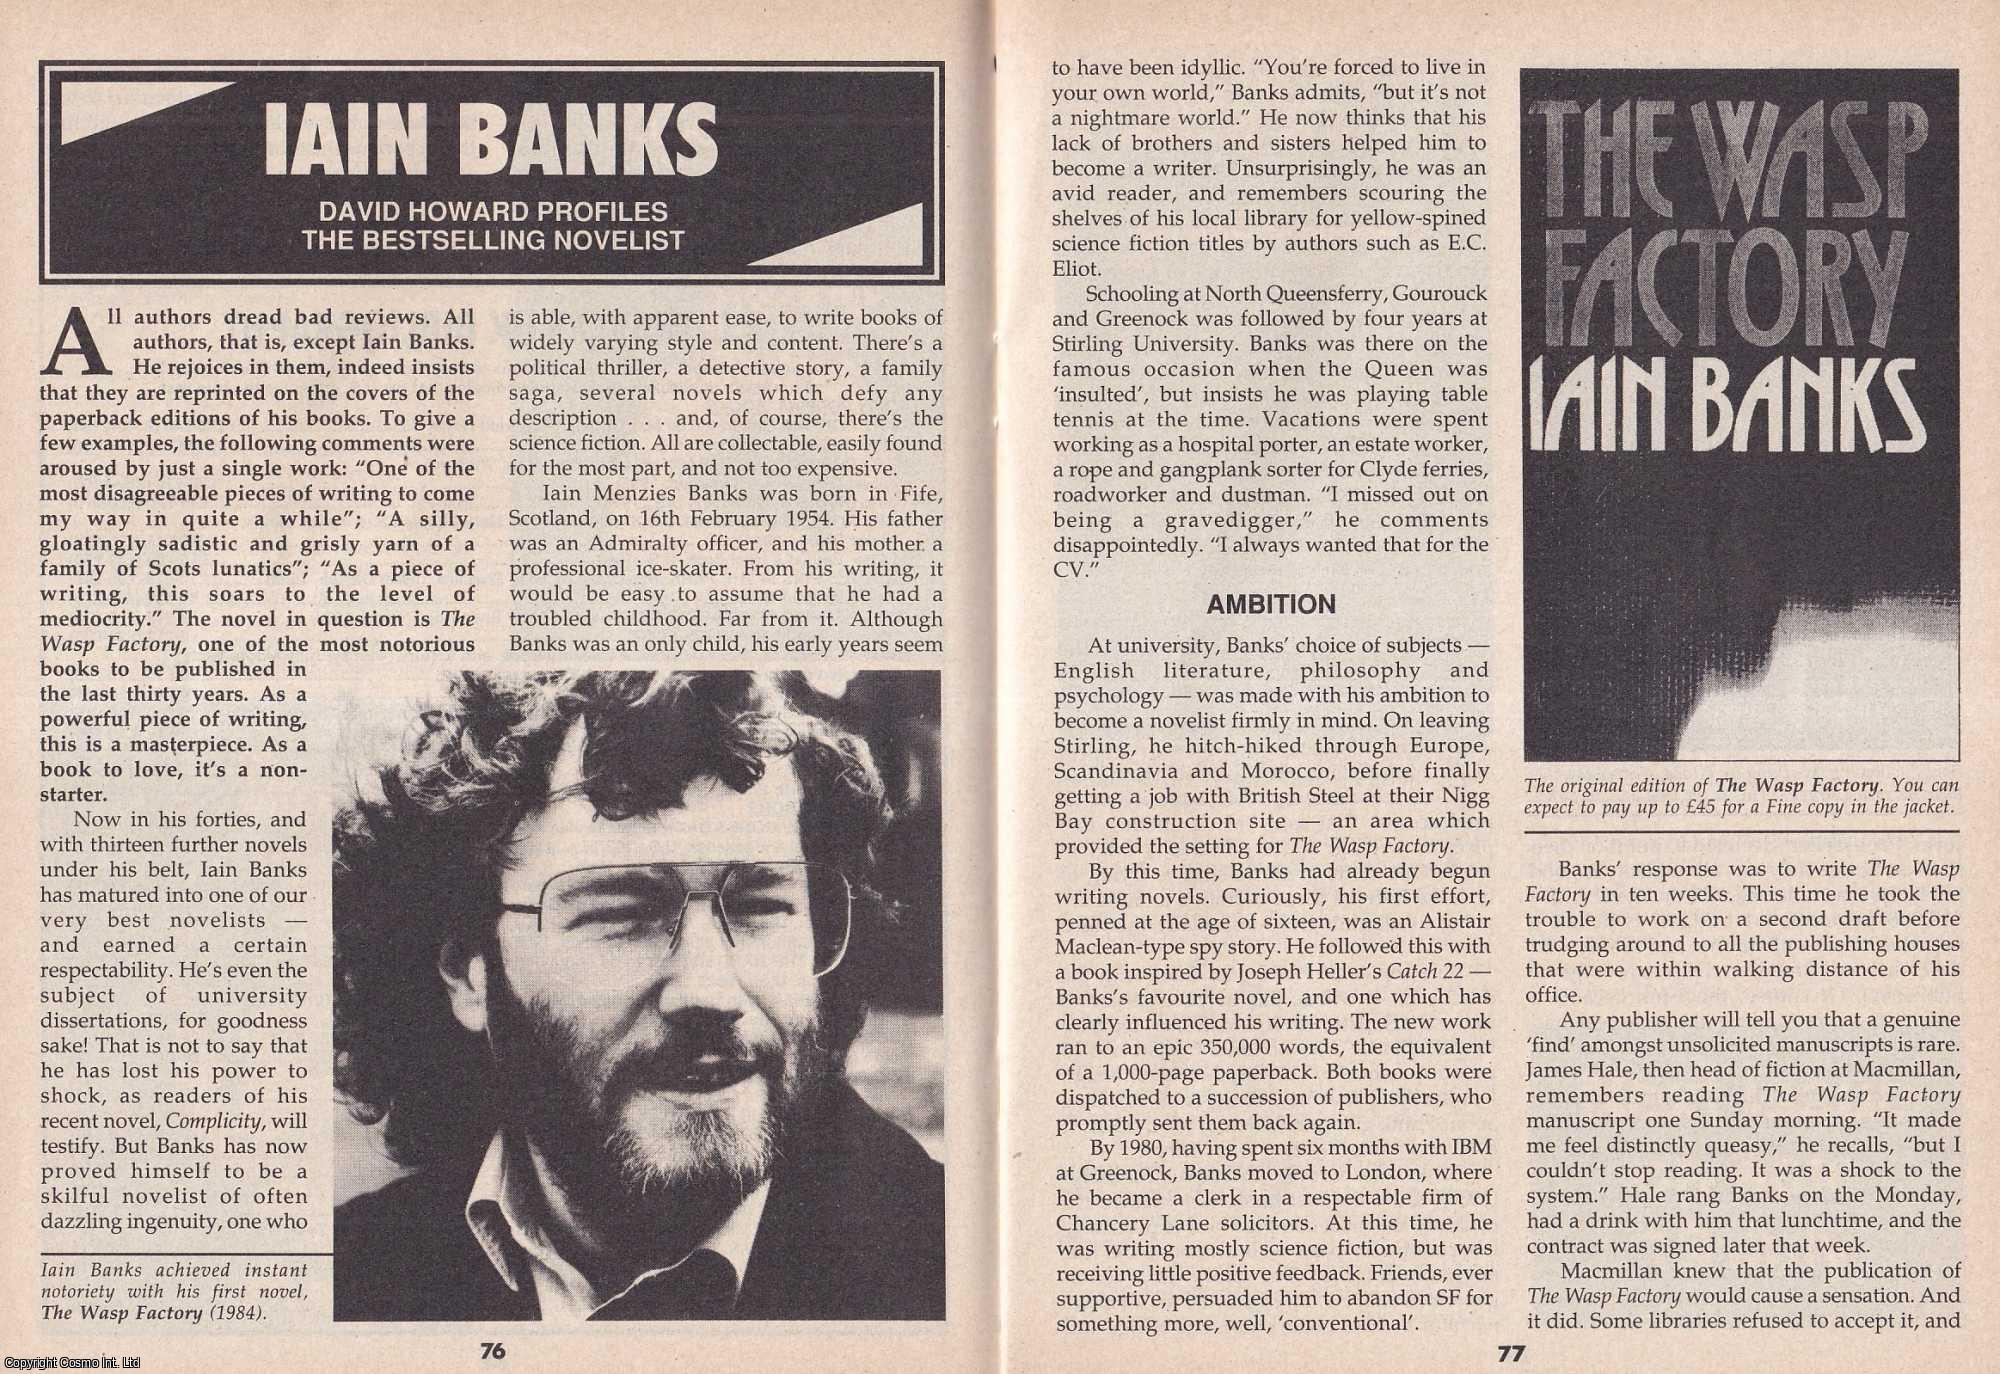 David Howard - Iain Banks. Profiling The Best Selling Novelist. This is an original article separated from an issue of The Book & Magazine Collector publication.